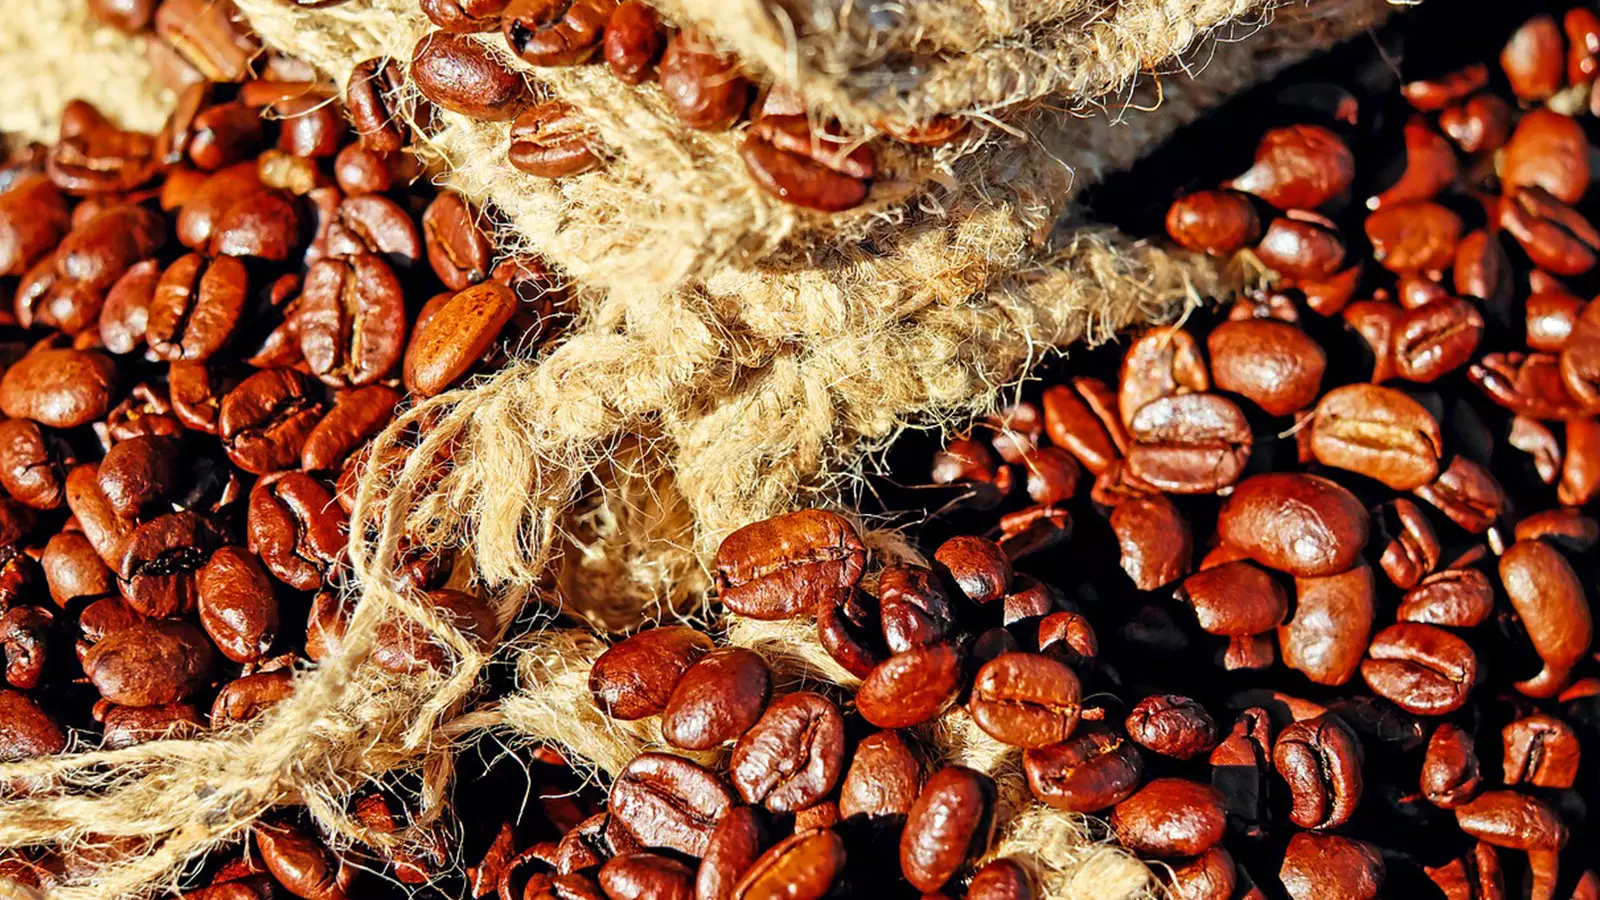 India’s coffee beans, until not very long ago sold in bulk to large buyers for blending into anonymous commercial blends, are now being exported to the tune of more than 70 per cent of production.